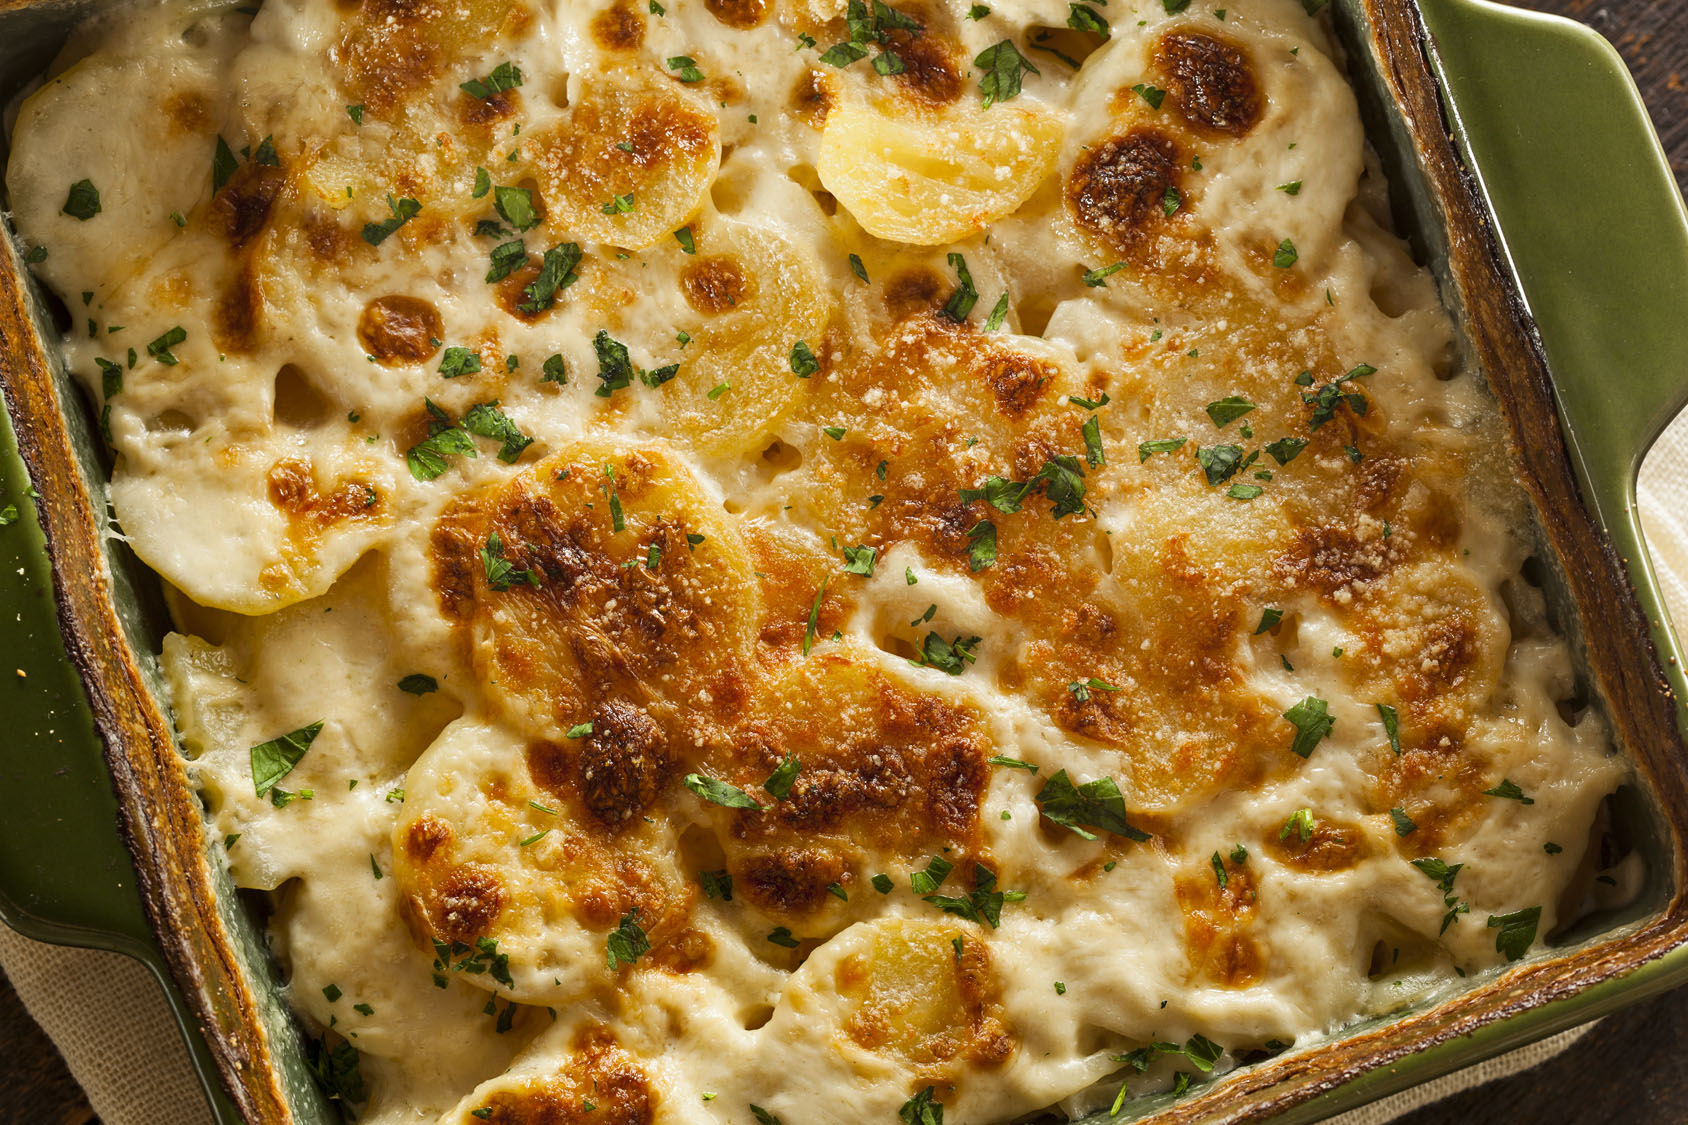 Homemade Cheesey Scalloped Potatoes with Parsley Flakes